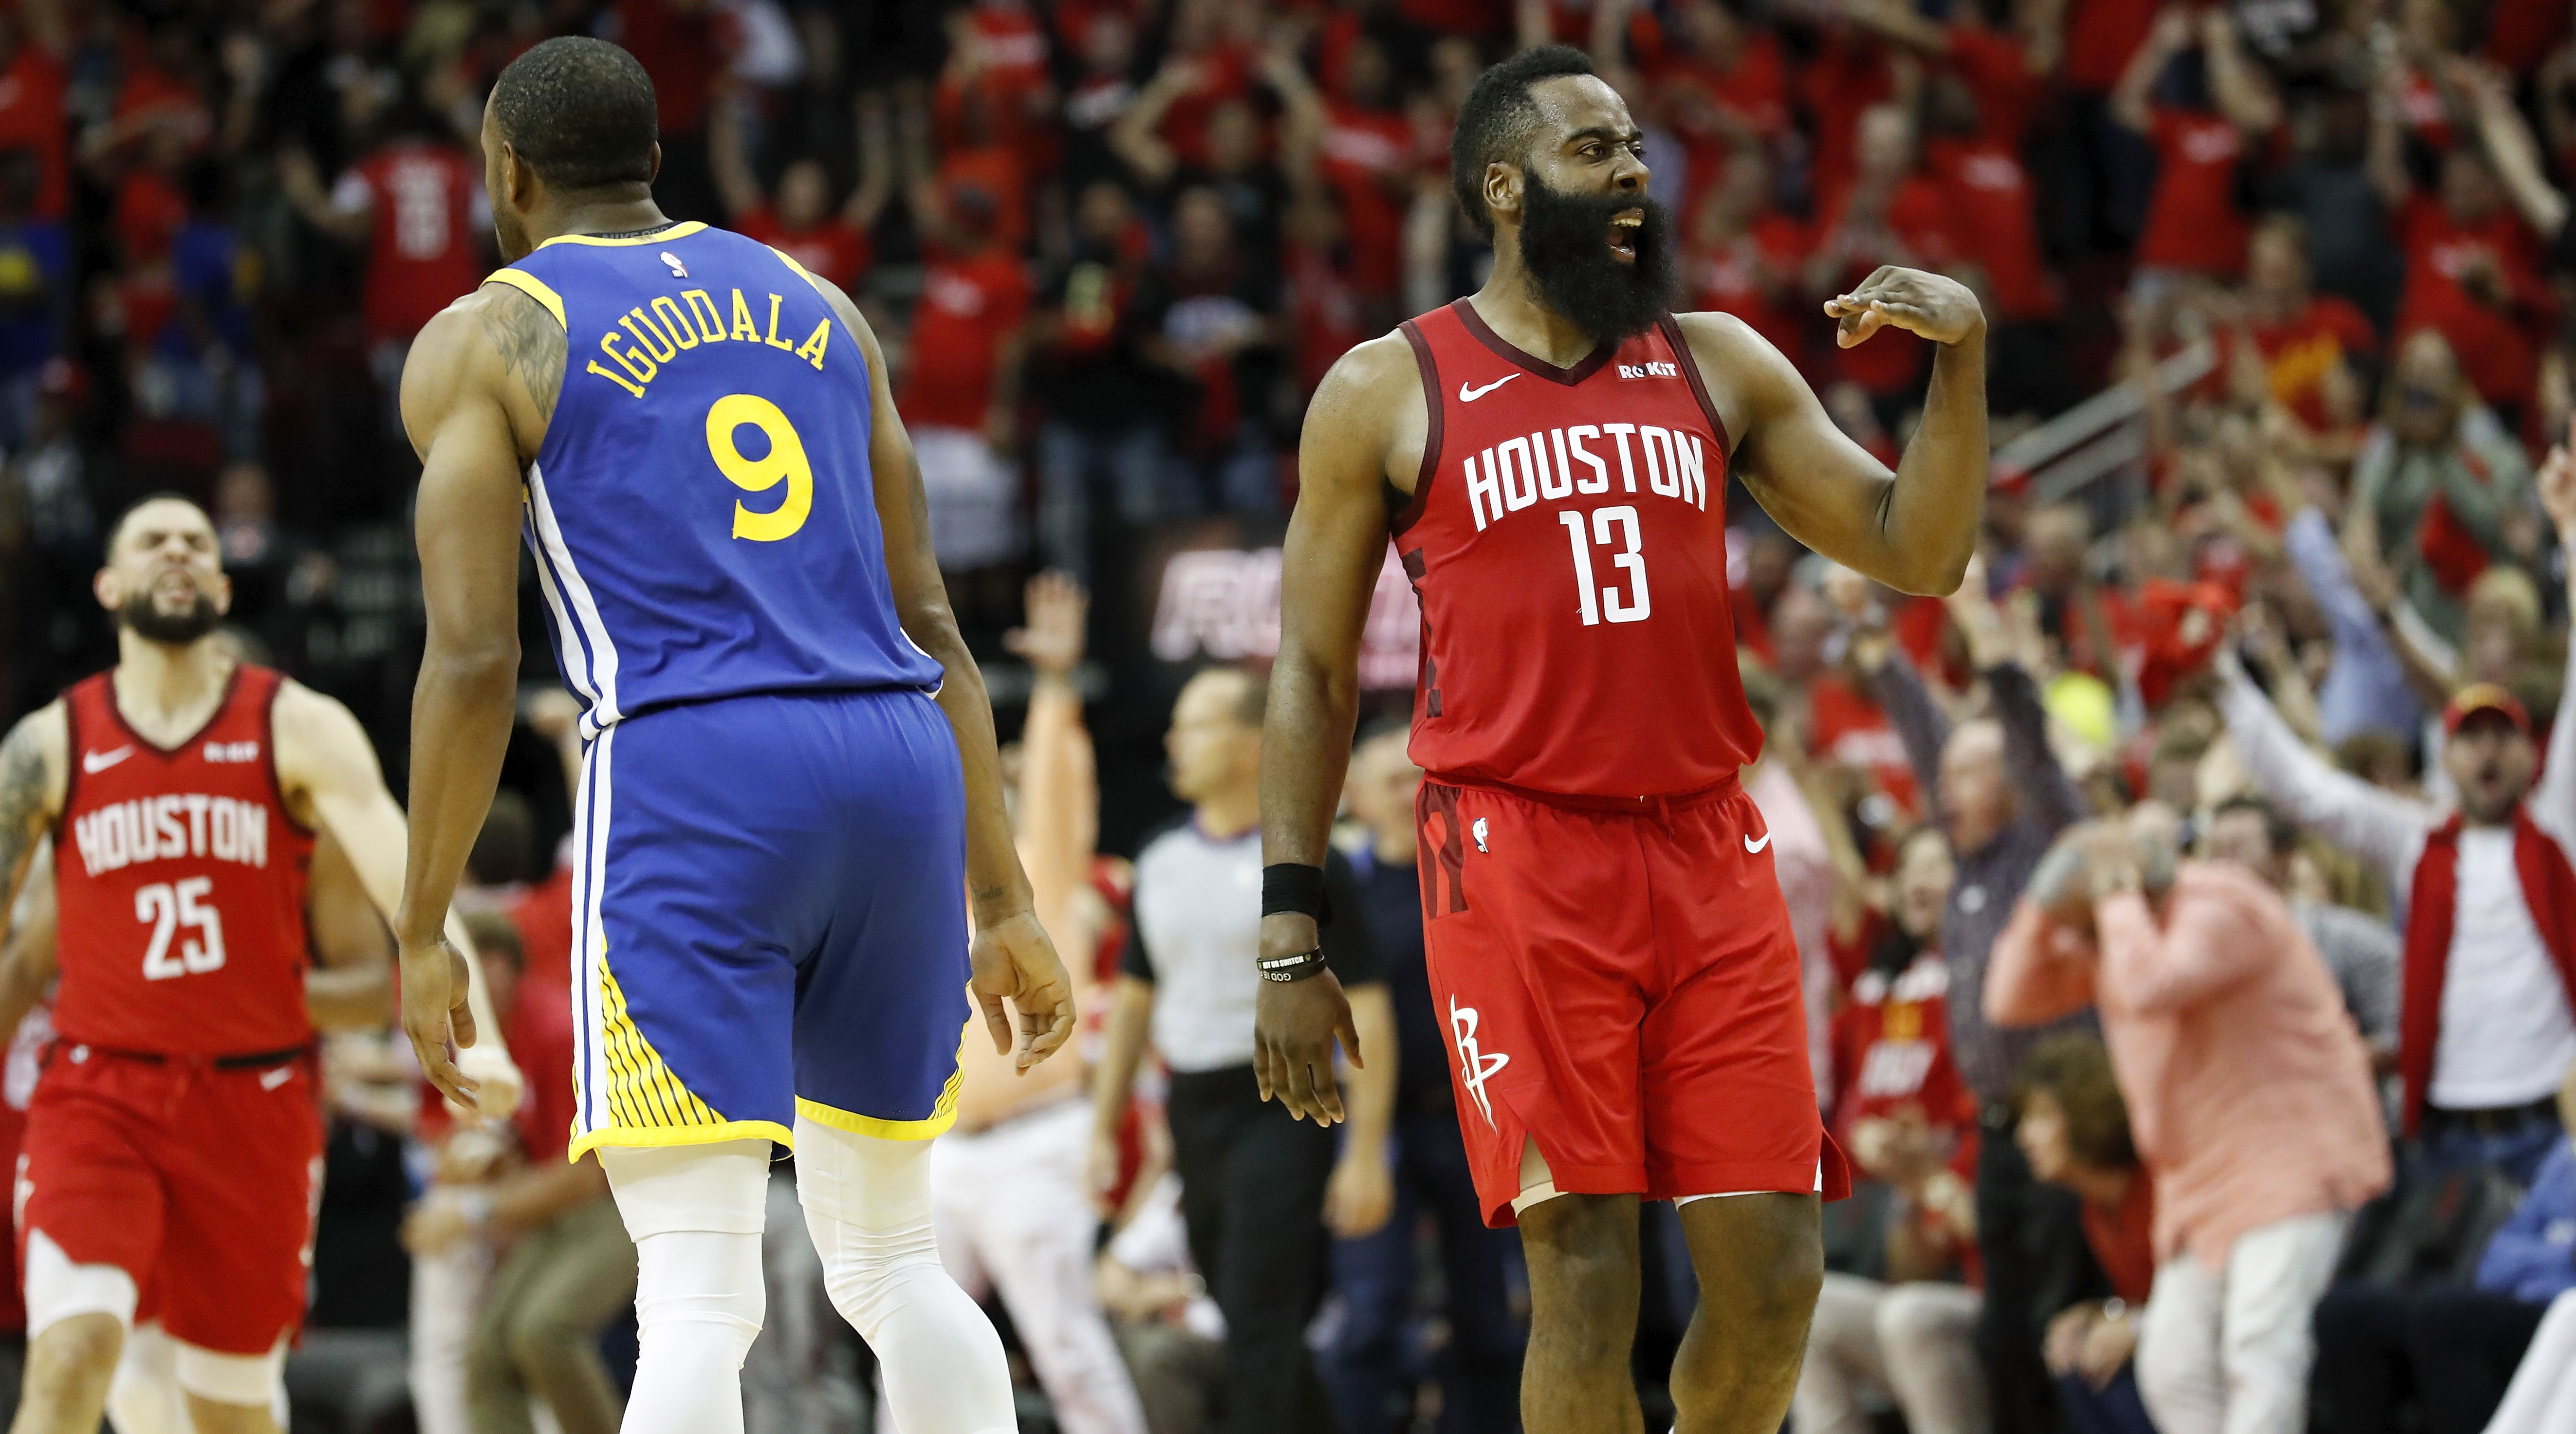 Rockets vs. Grizzlies: 5 things to watch